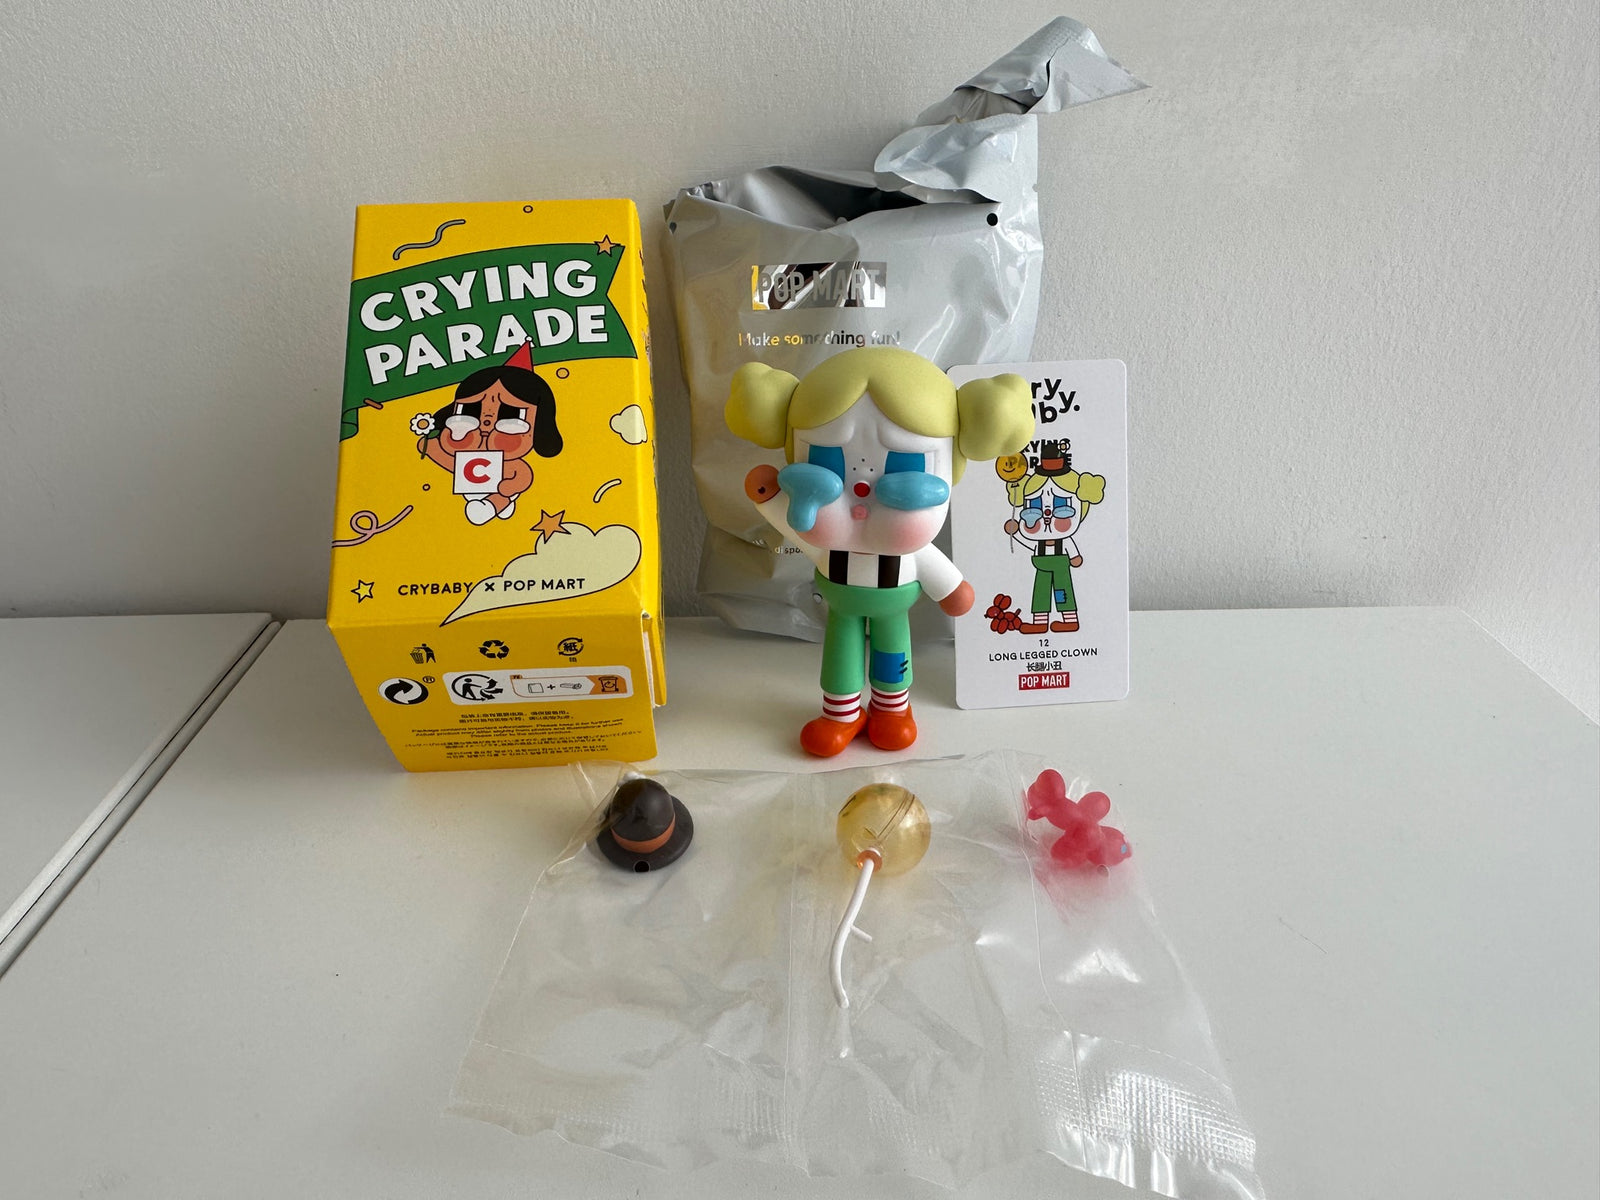 Long Legged Clown - CRYBABY Crying Parade Series by POP MART - 1